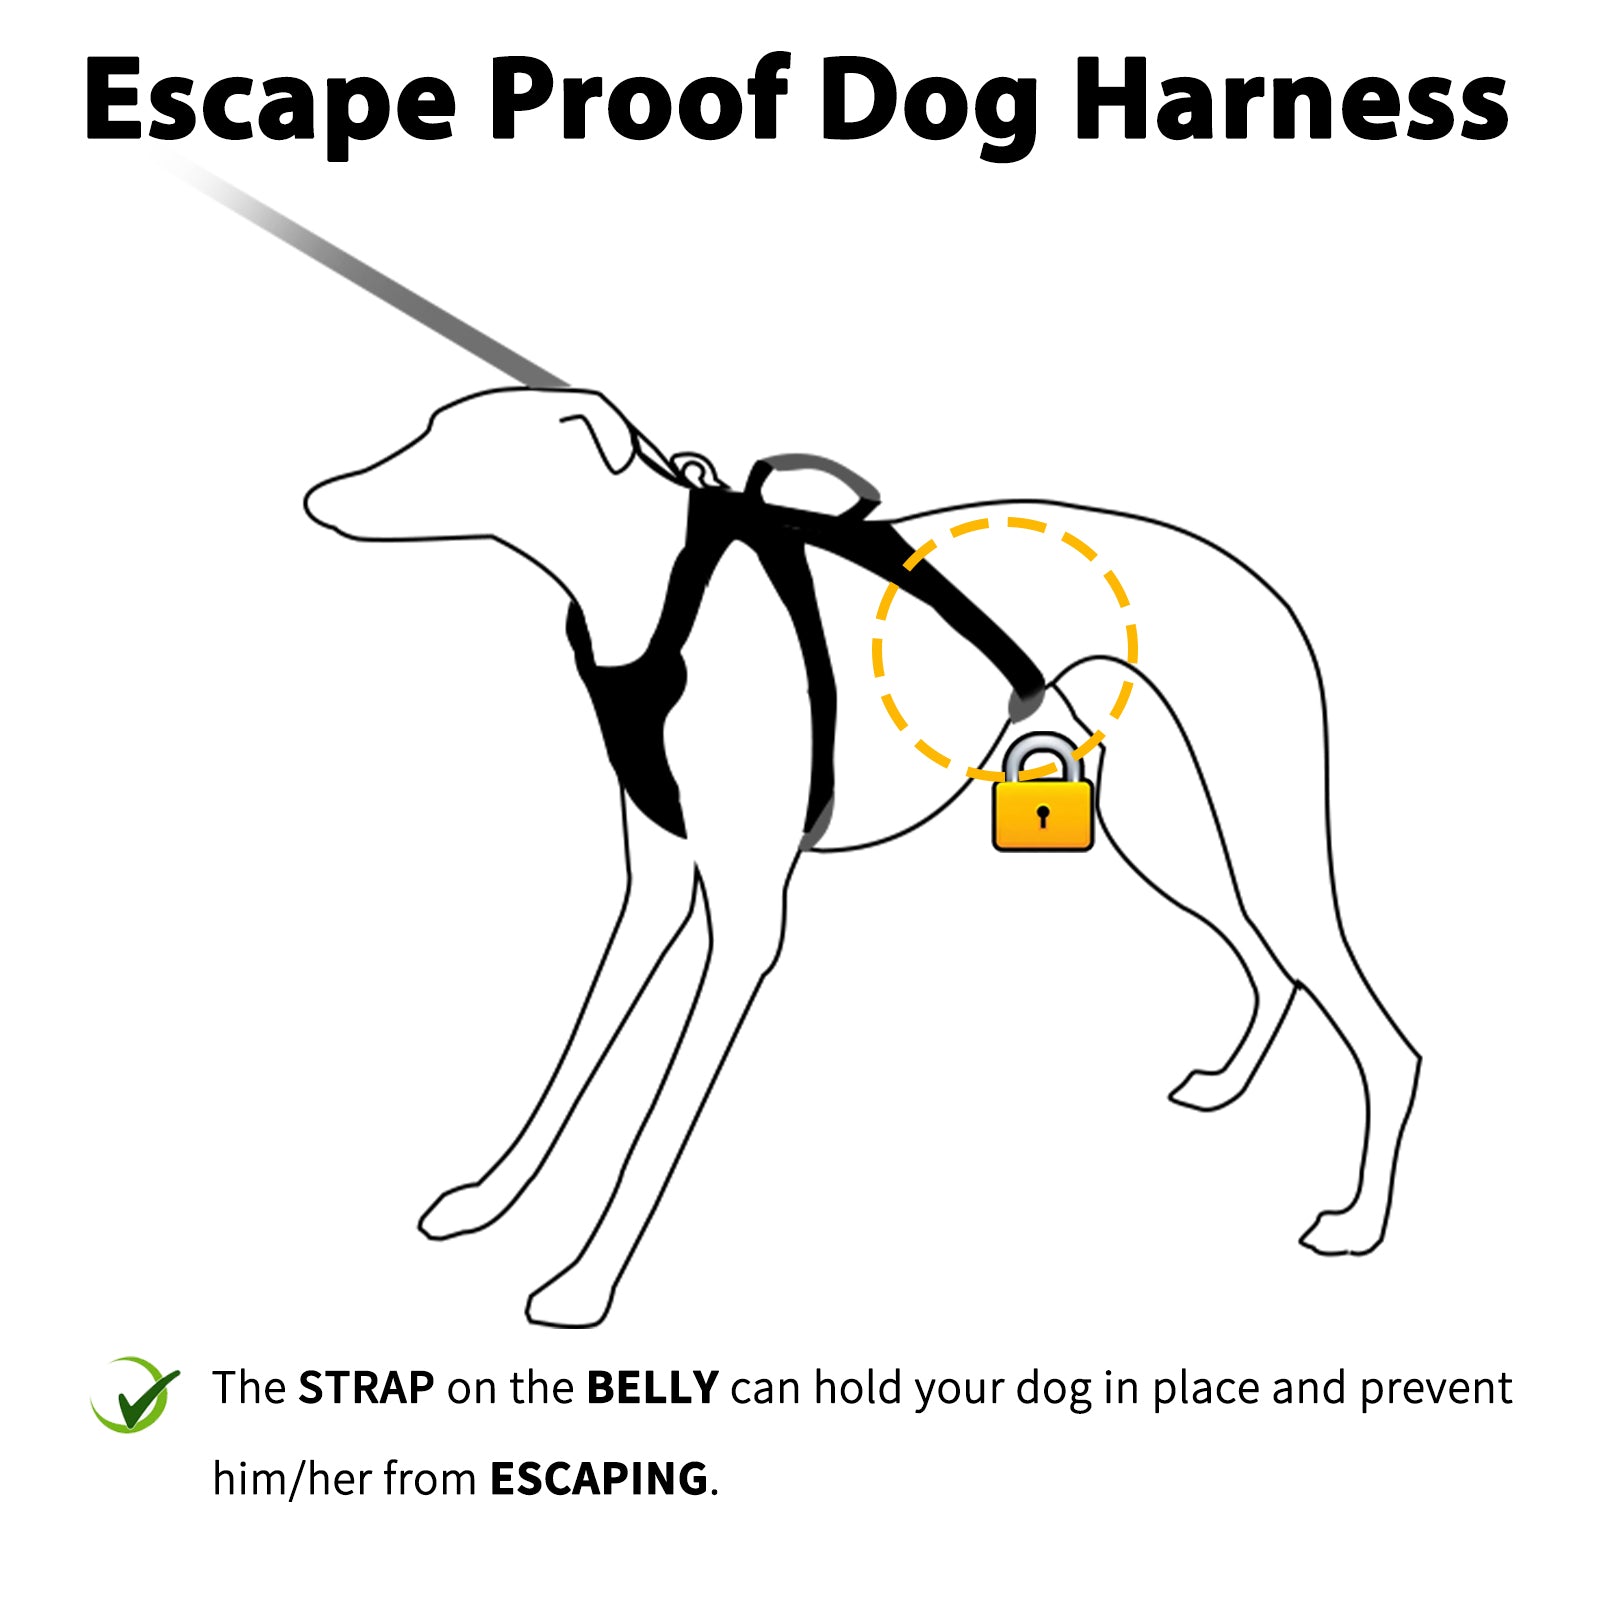 Escape Proof Dog Harness and Water-Repellent Dog Harness (Black)